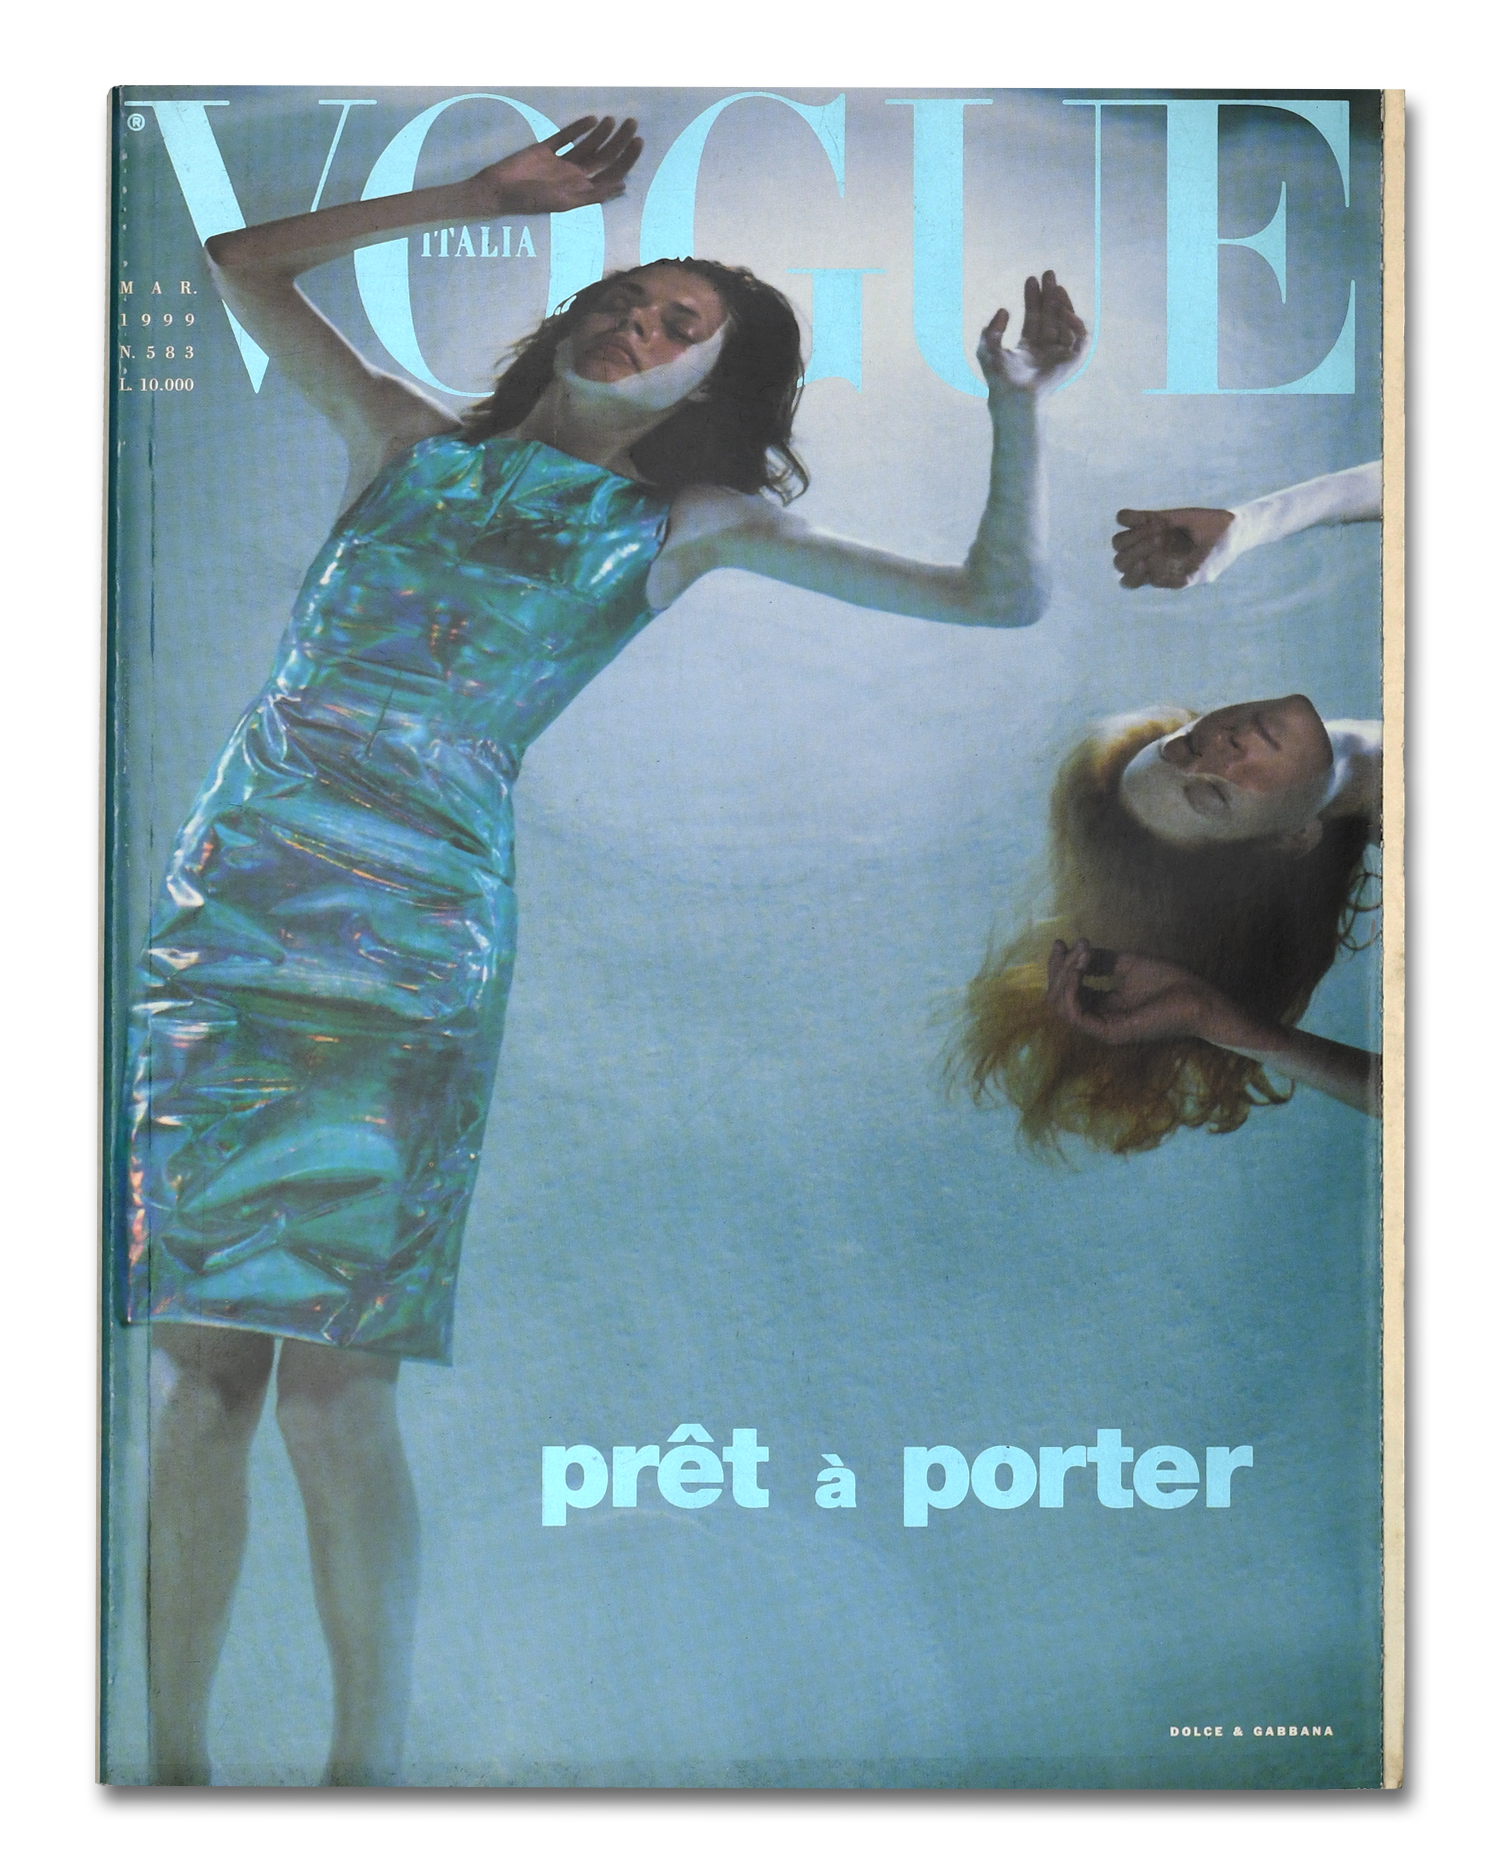 Vogue Italia, March 1999<BR>Floating by Steven Meisel